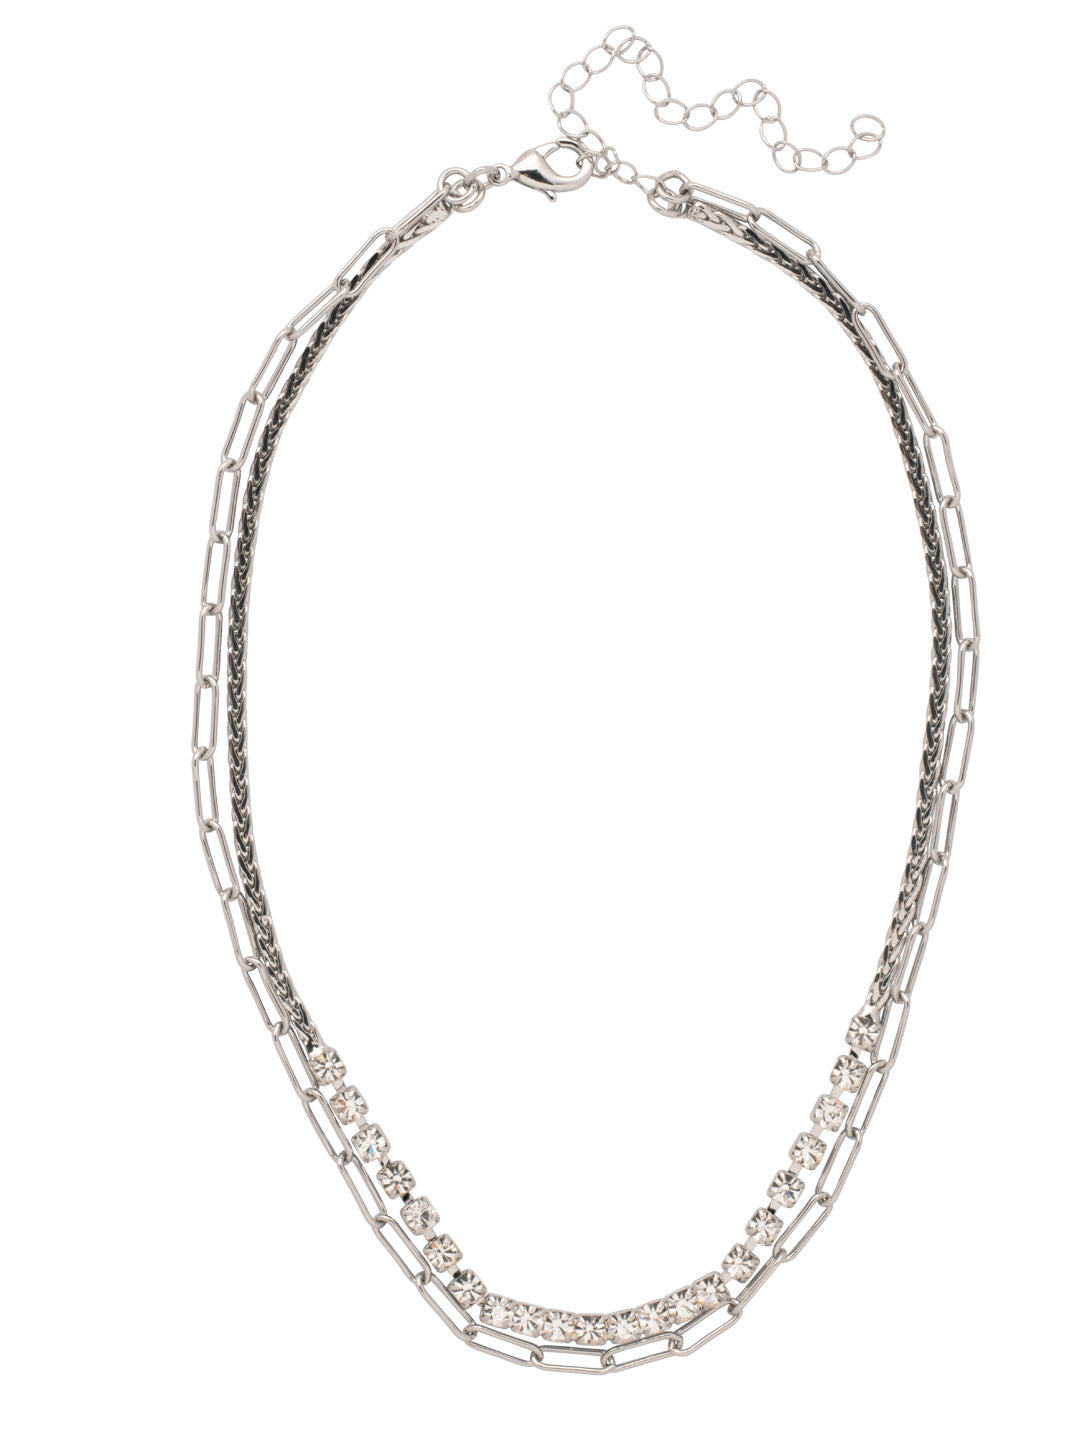 Crystal and Paperclip Chain Layered Necklace - 4NFJ8PDCRY